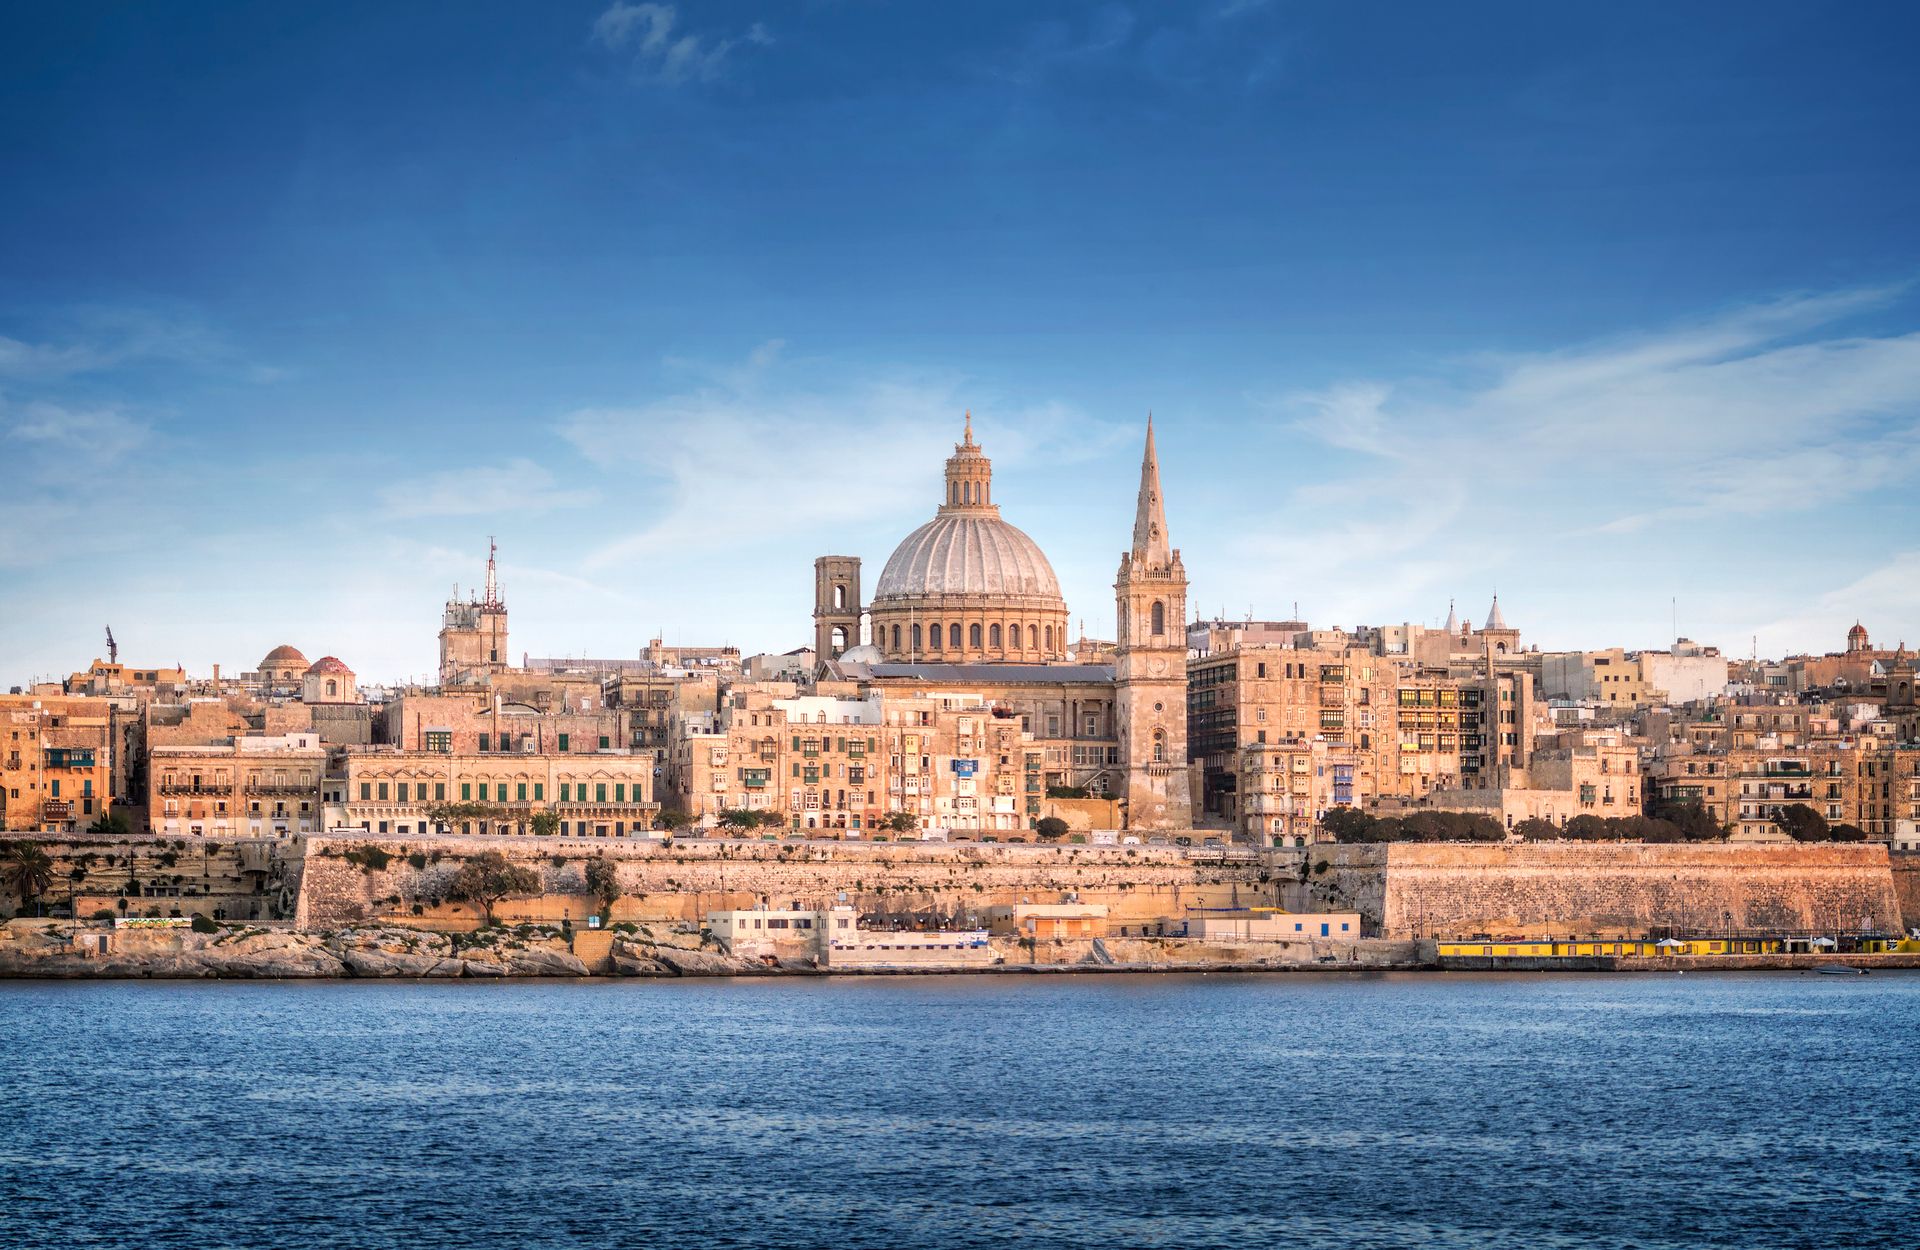 Invest in Malta for citizenship by investment